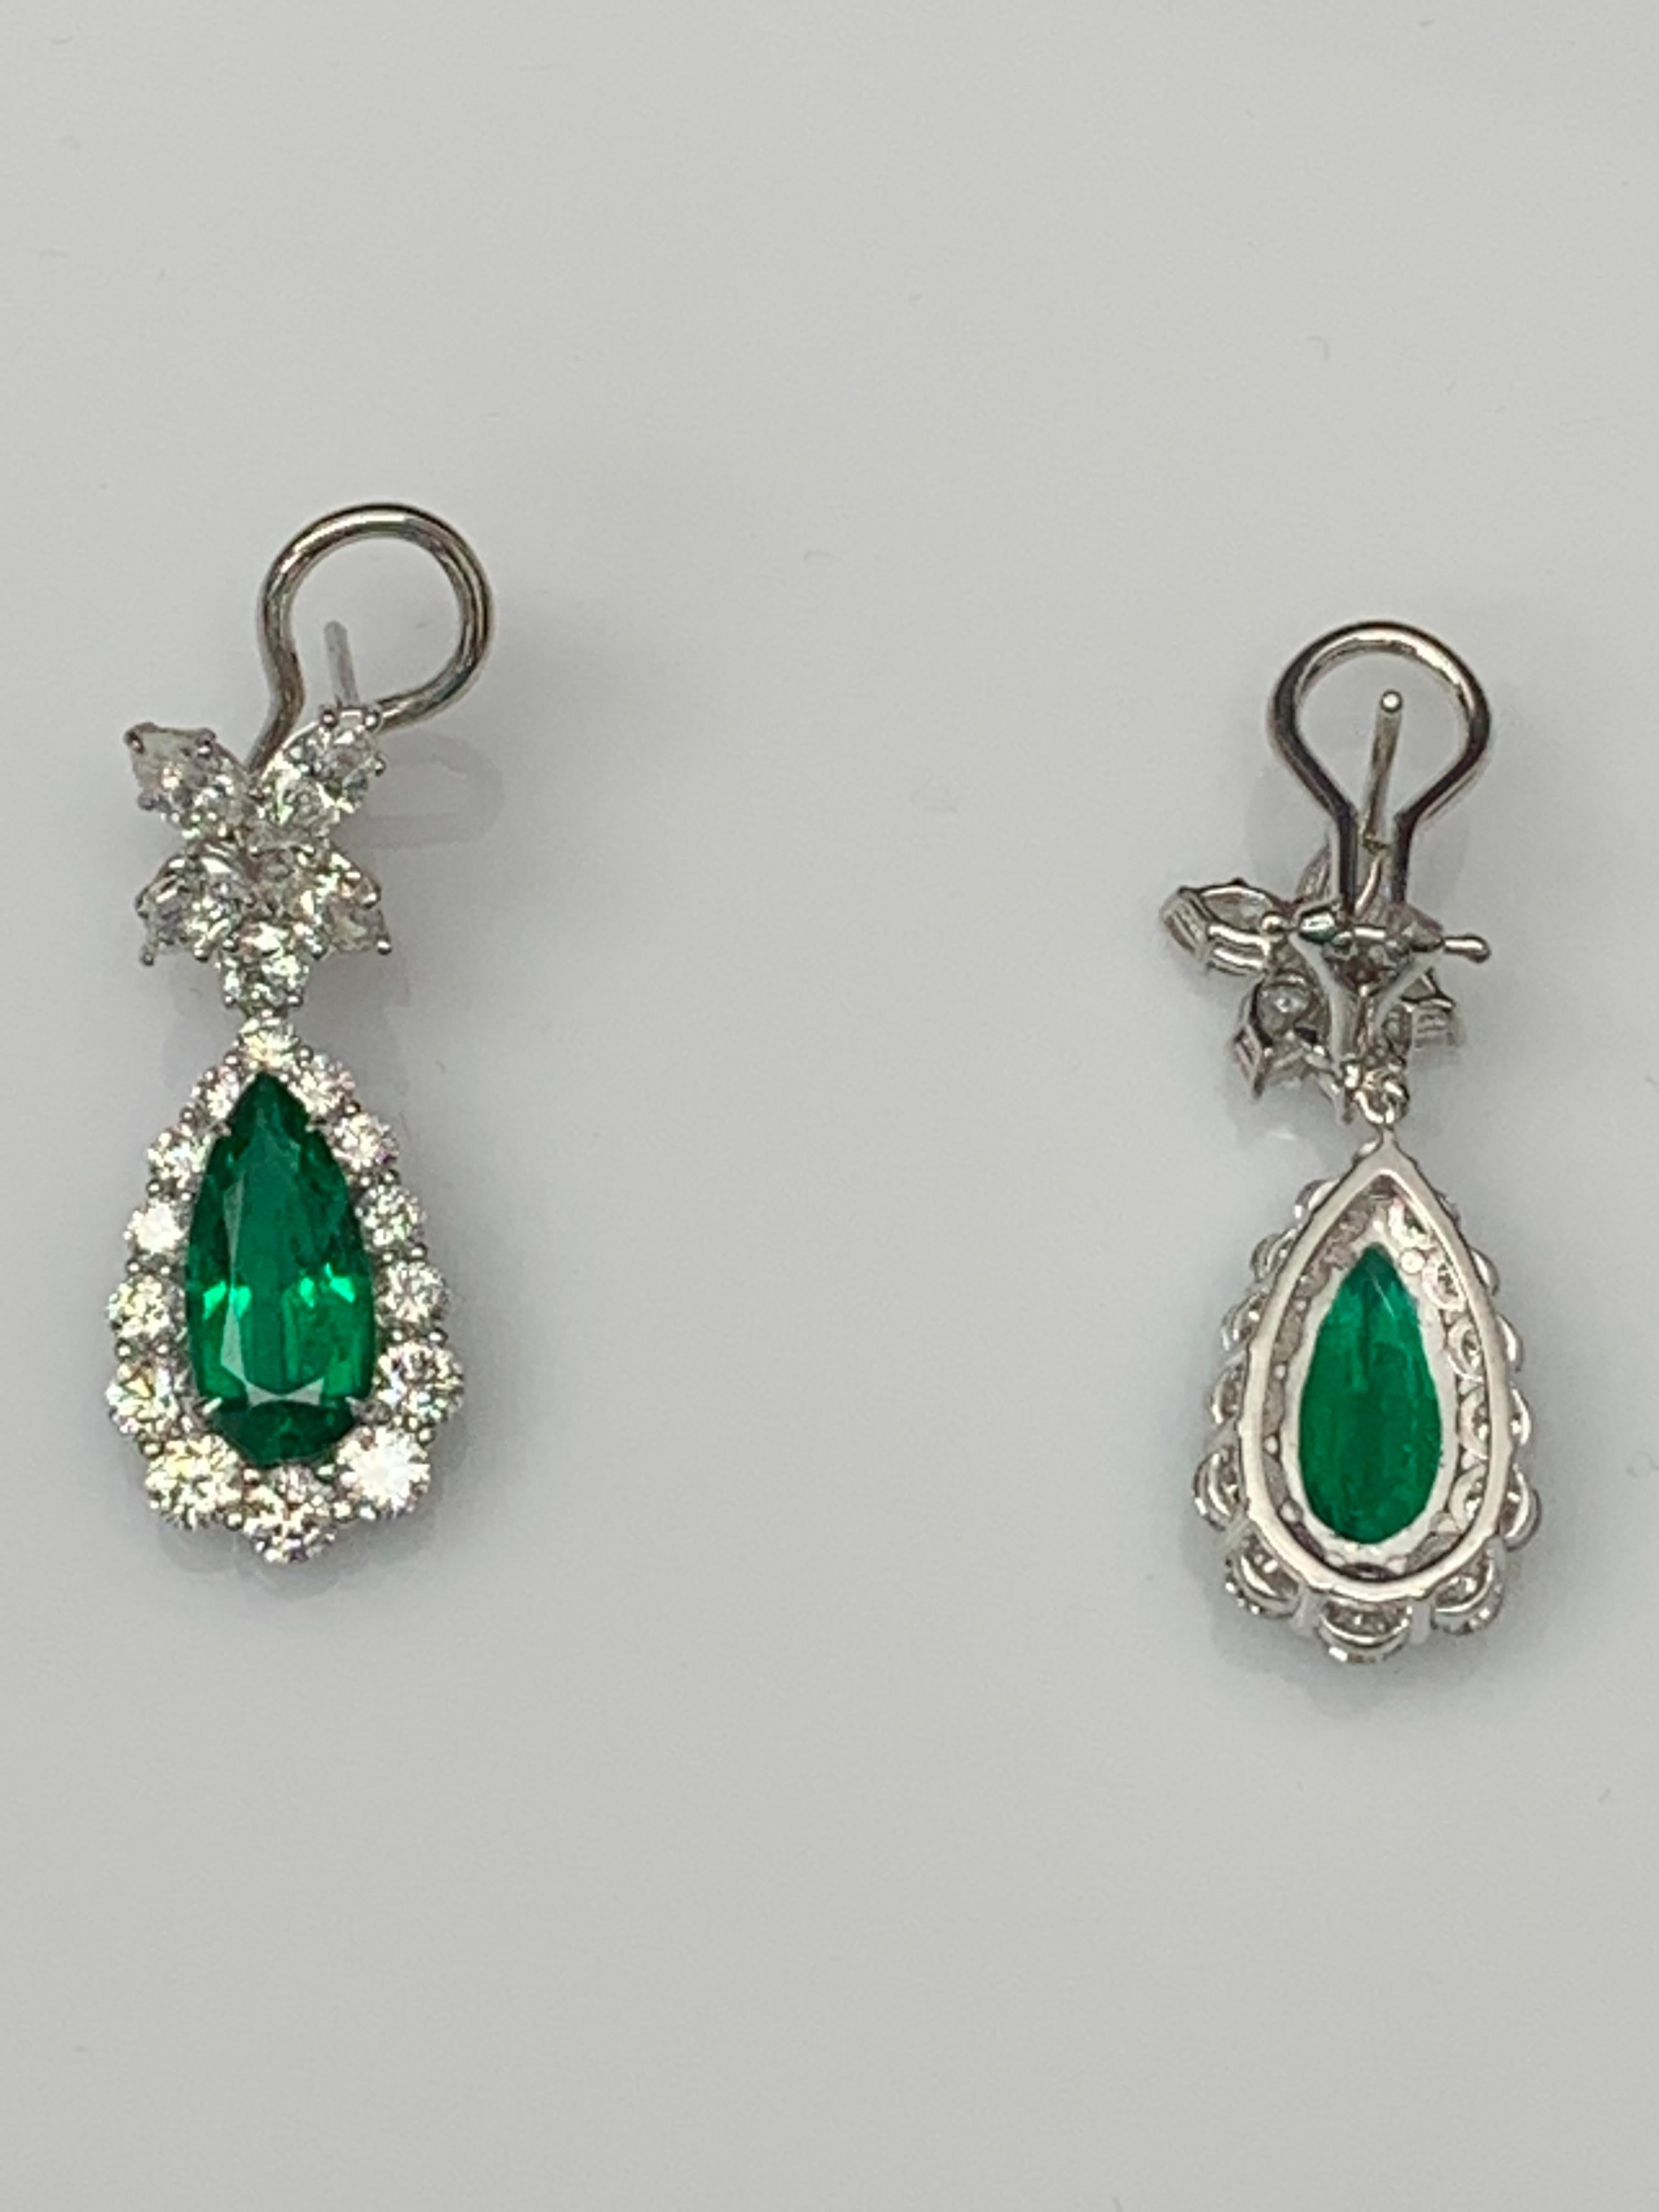 4.80 Carat Pear Shape Emerald and Diamond Drop Earrings in 18K White Gold For Sale 2